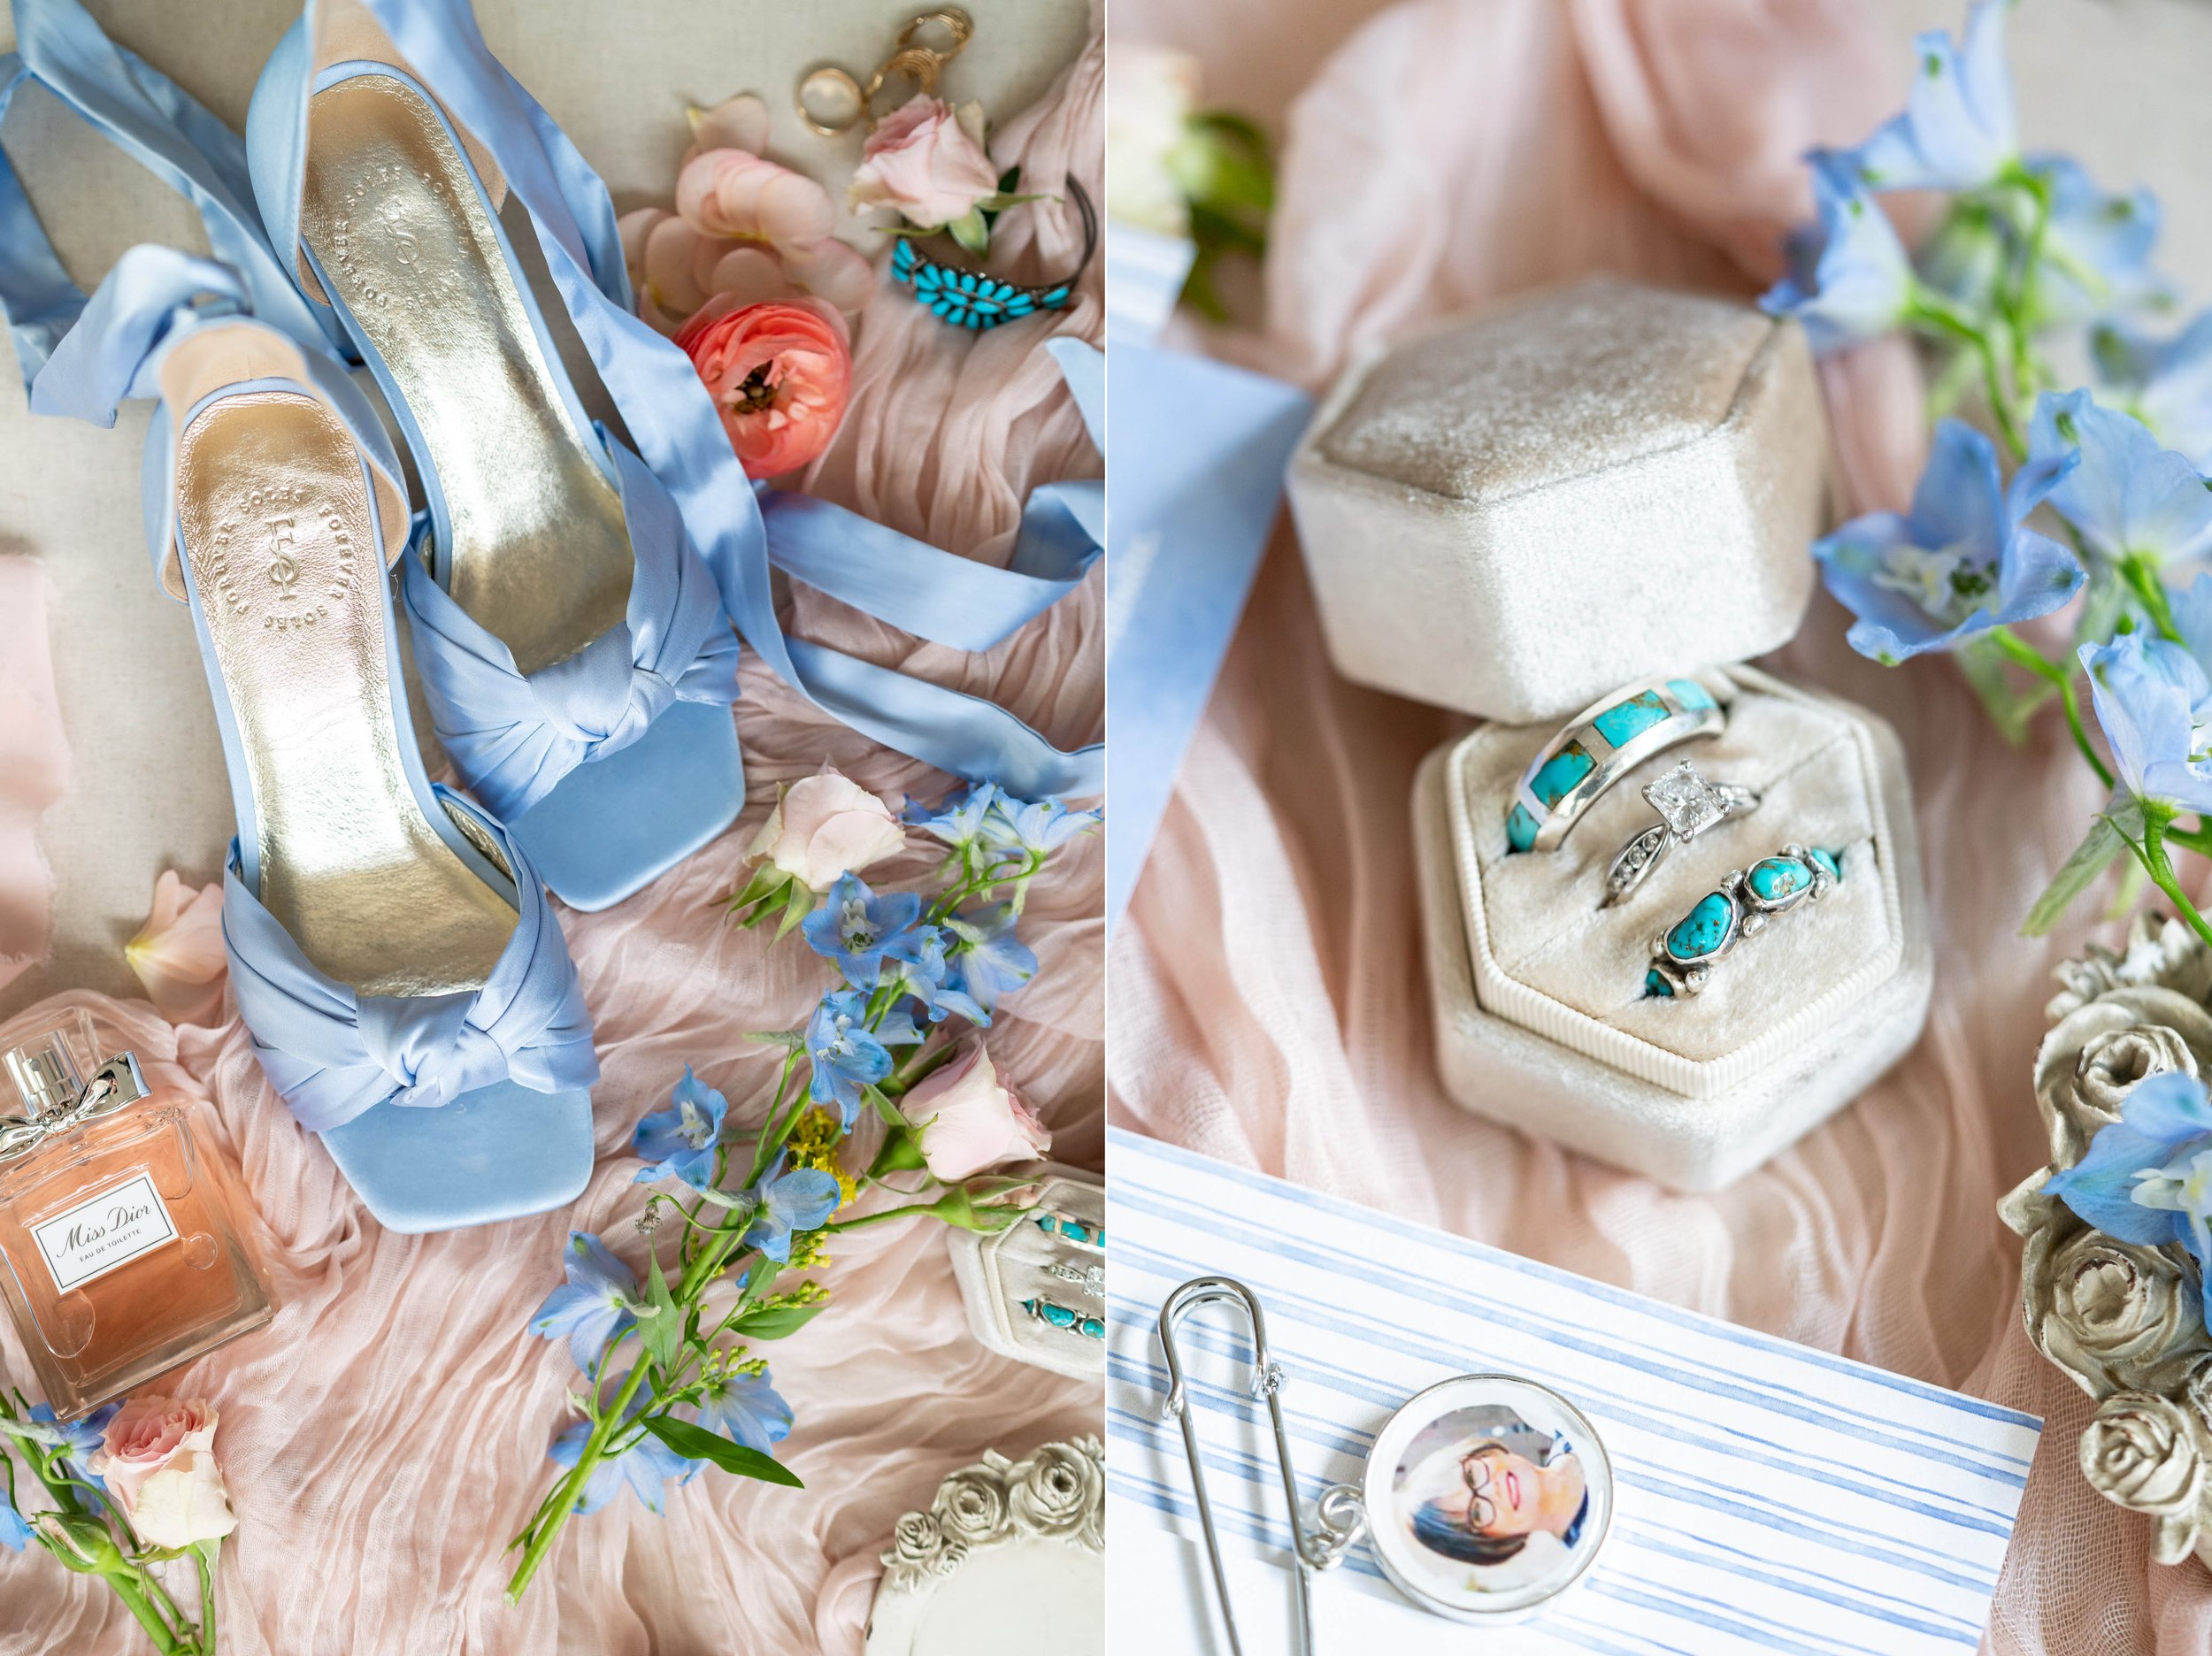 Colorful styling flat lay wedding details with Forever Soles shoes and Mrs boxes